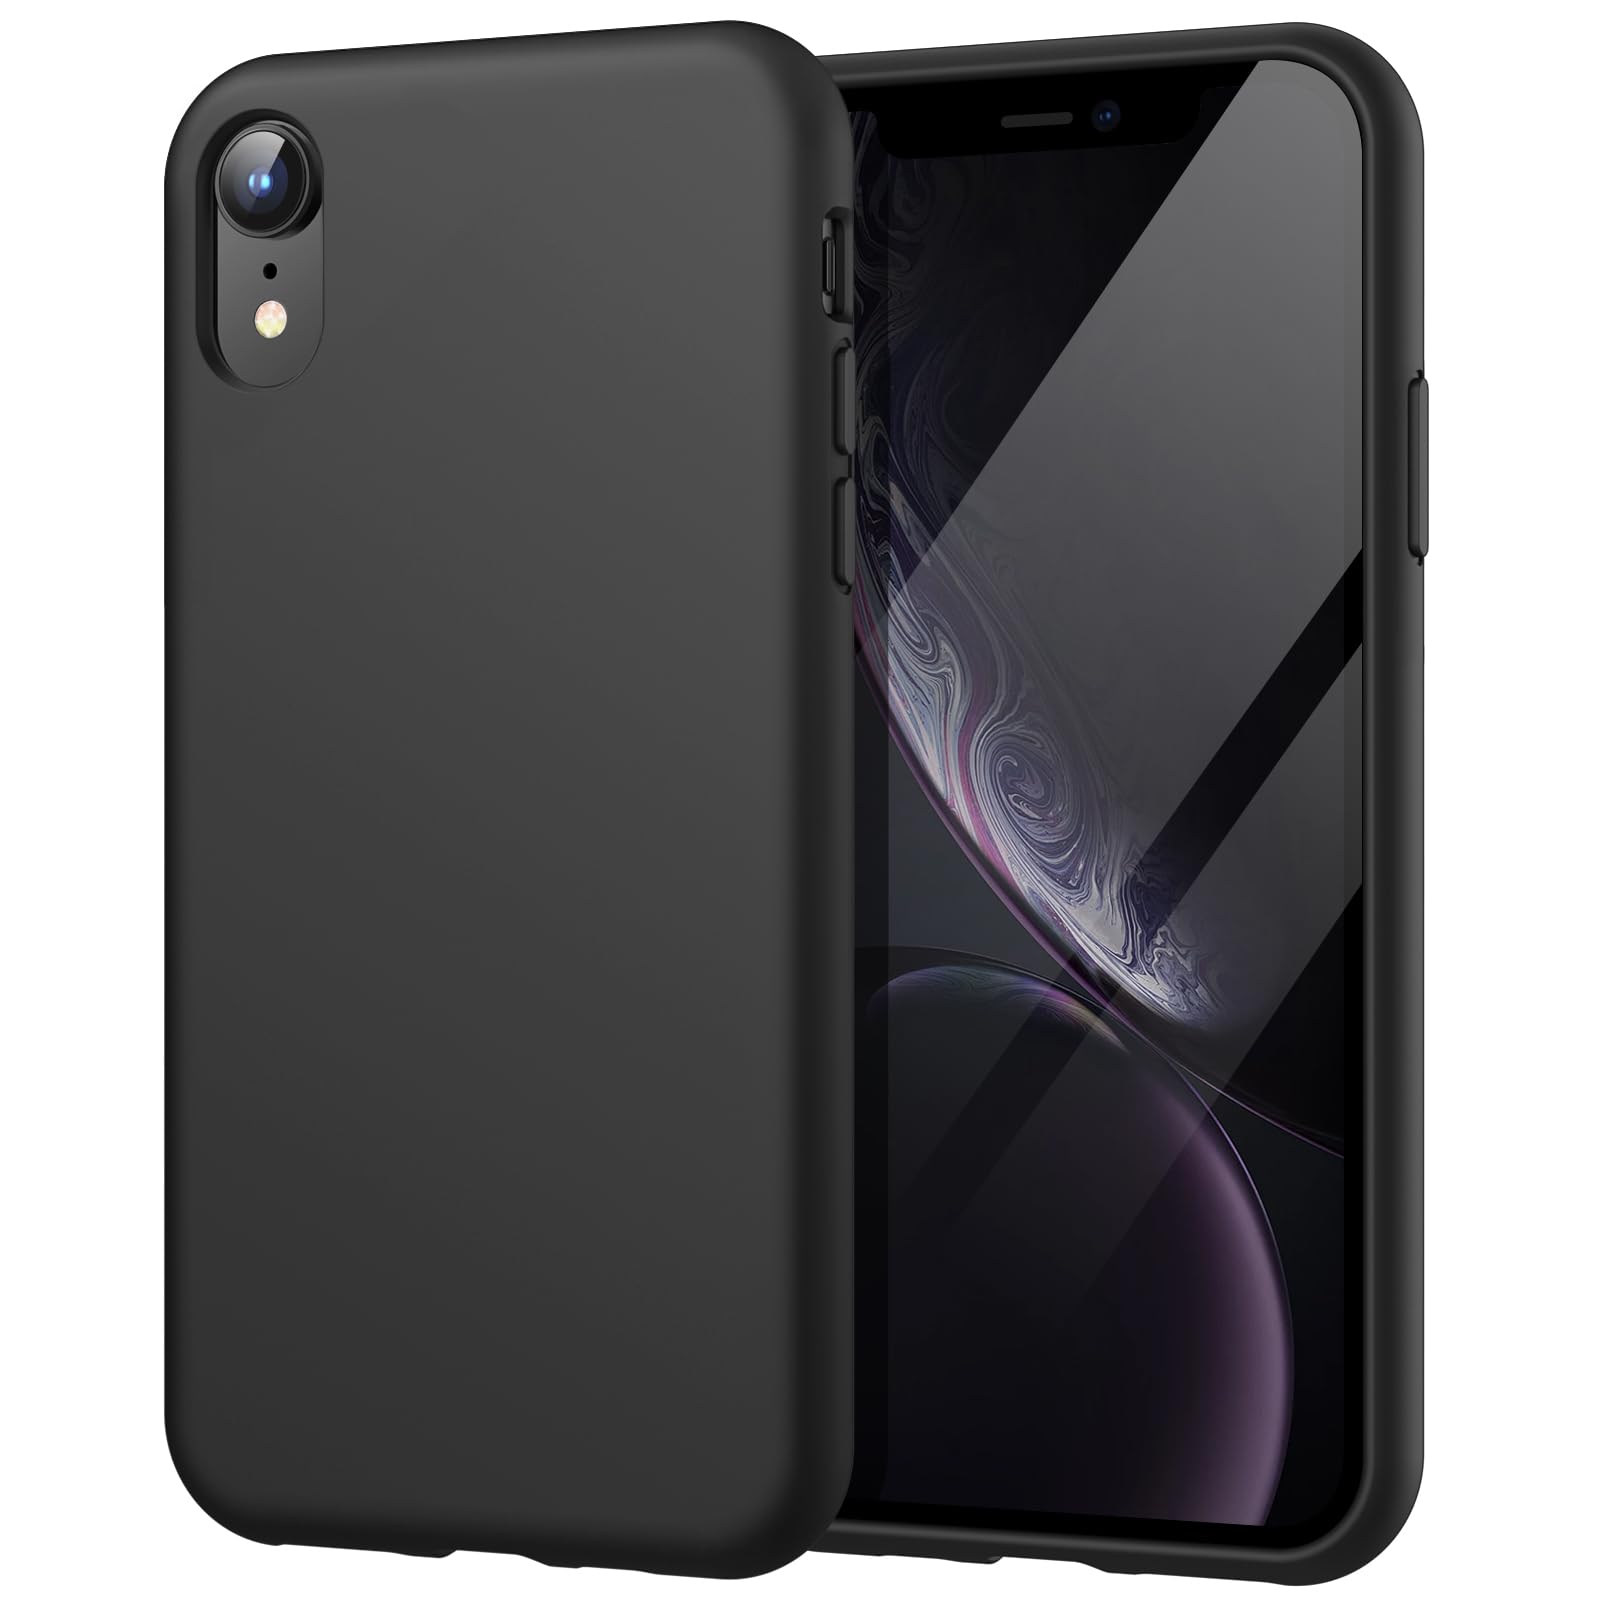 JETech Silicone Case for iPhone XR, 6.1-Inch, Silky-soft touch Full-Body Protective Case, Shockproof cover with Microfiber Lining, Black